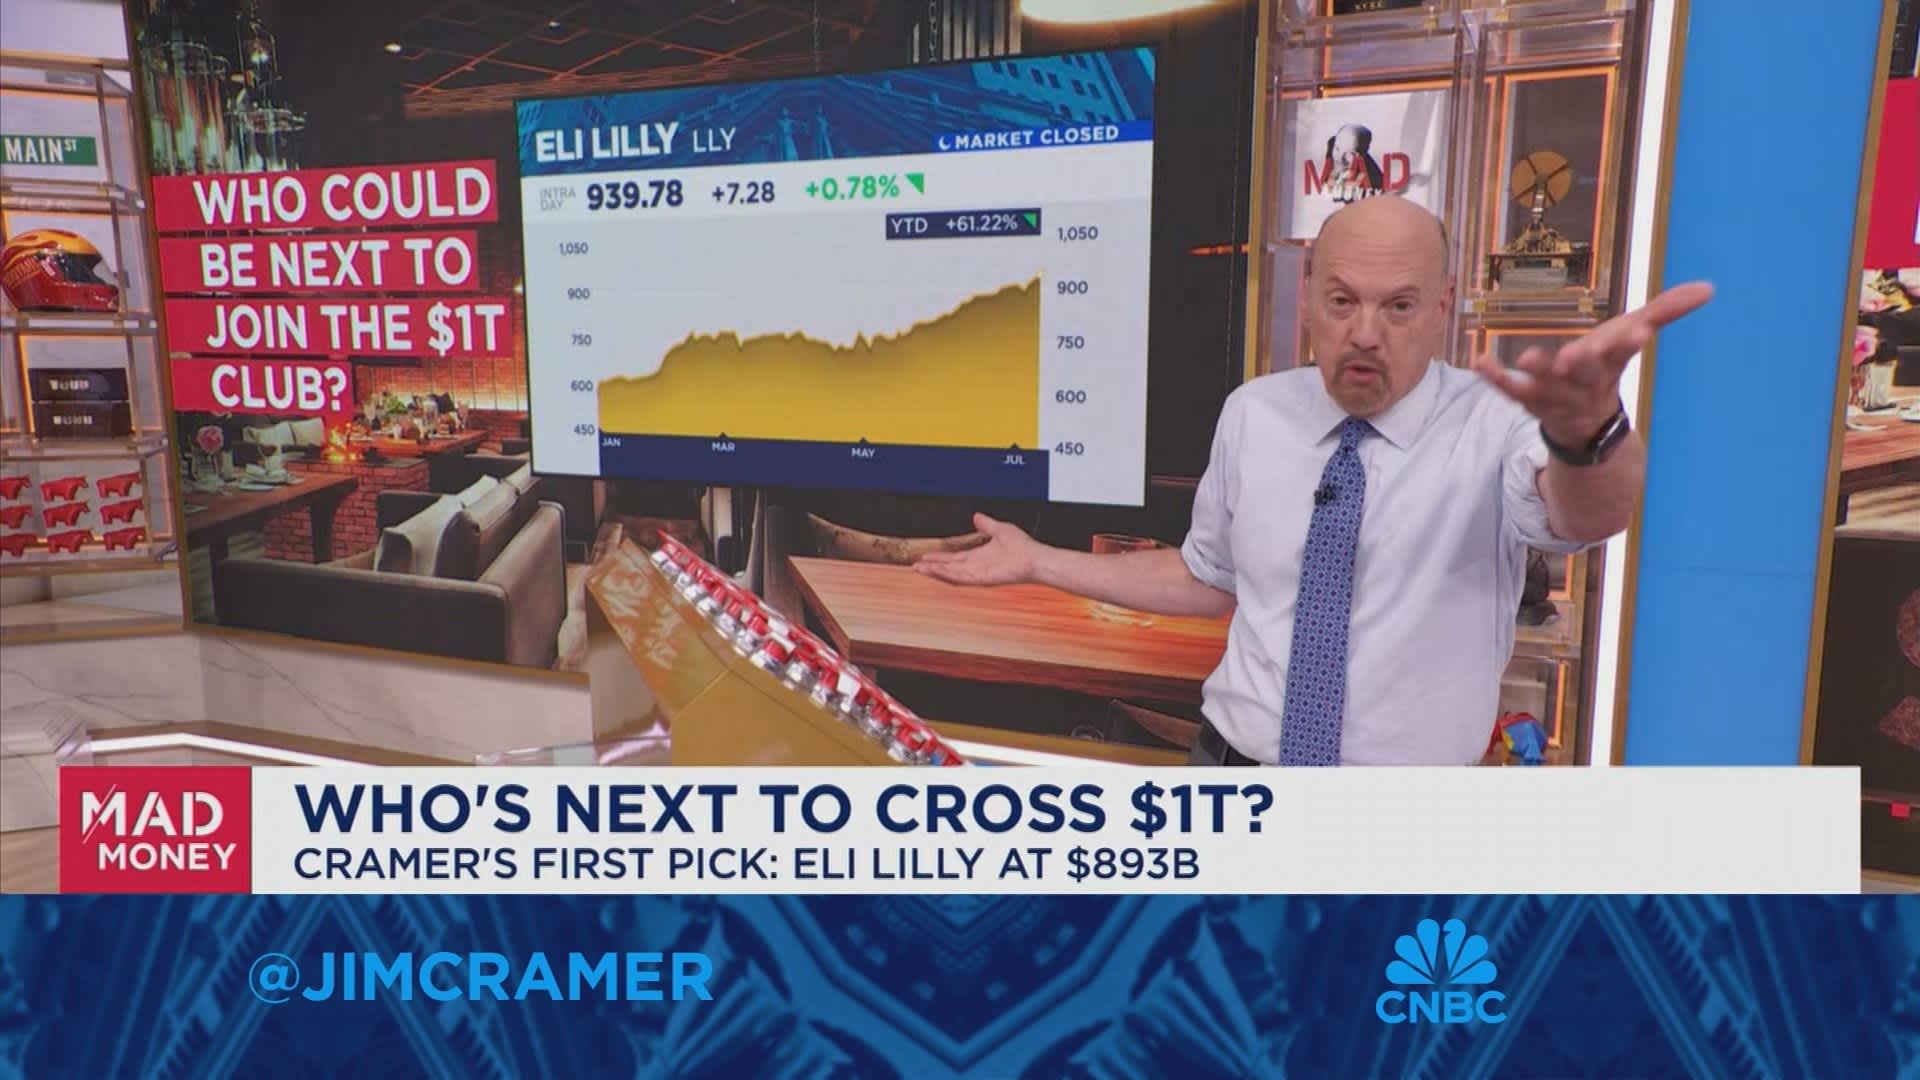 Eli Lilly could be next to cross $1 trillion mark, says Jim Cramer